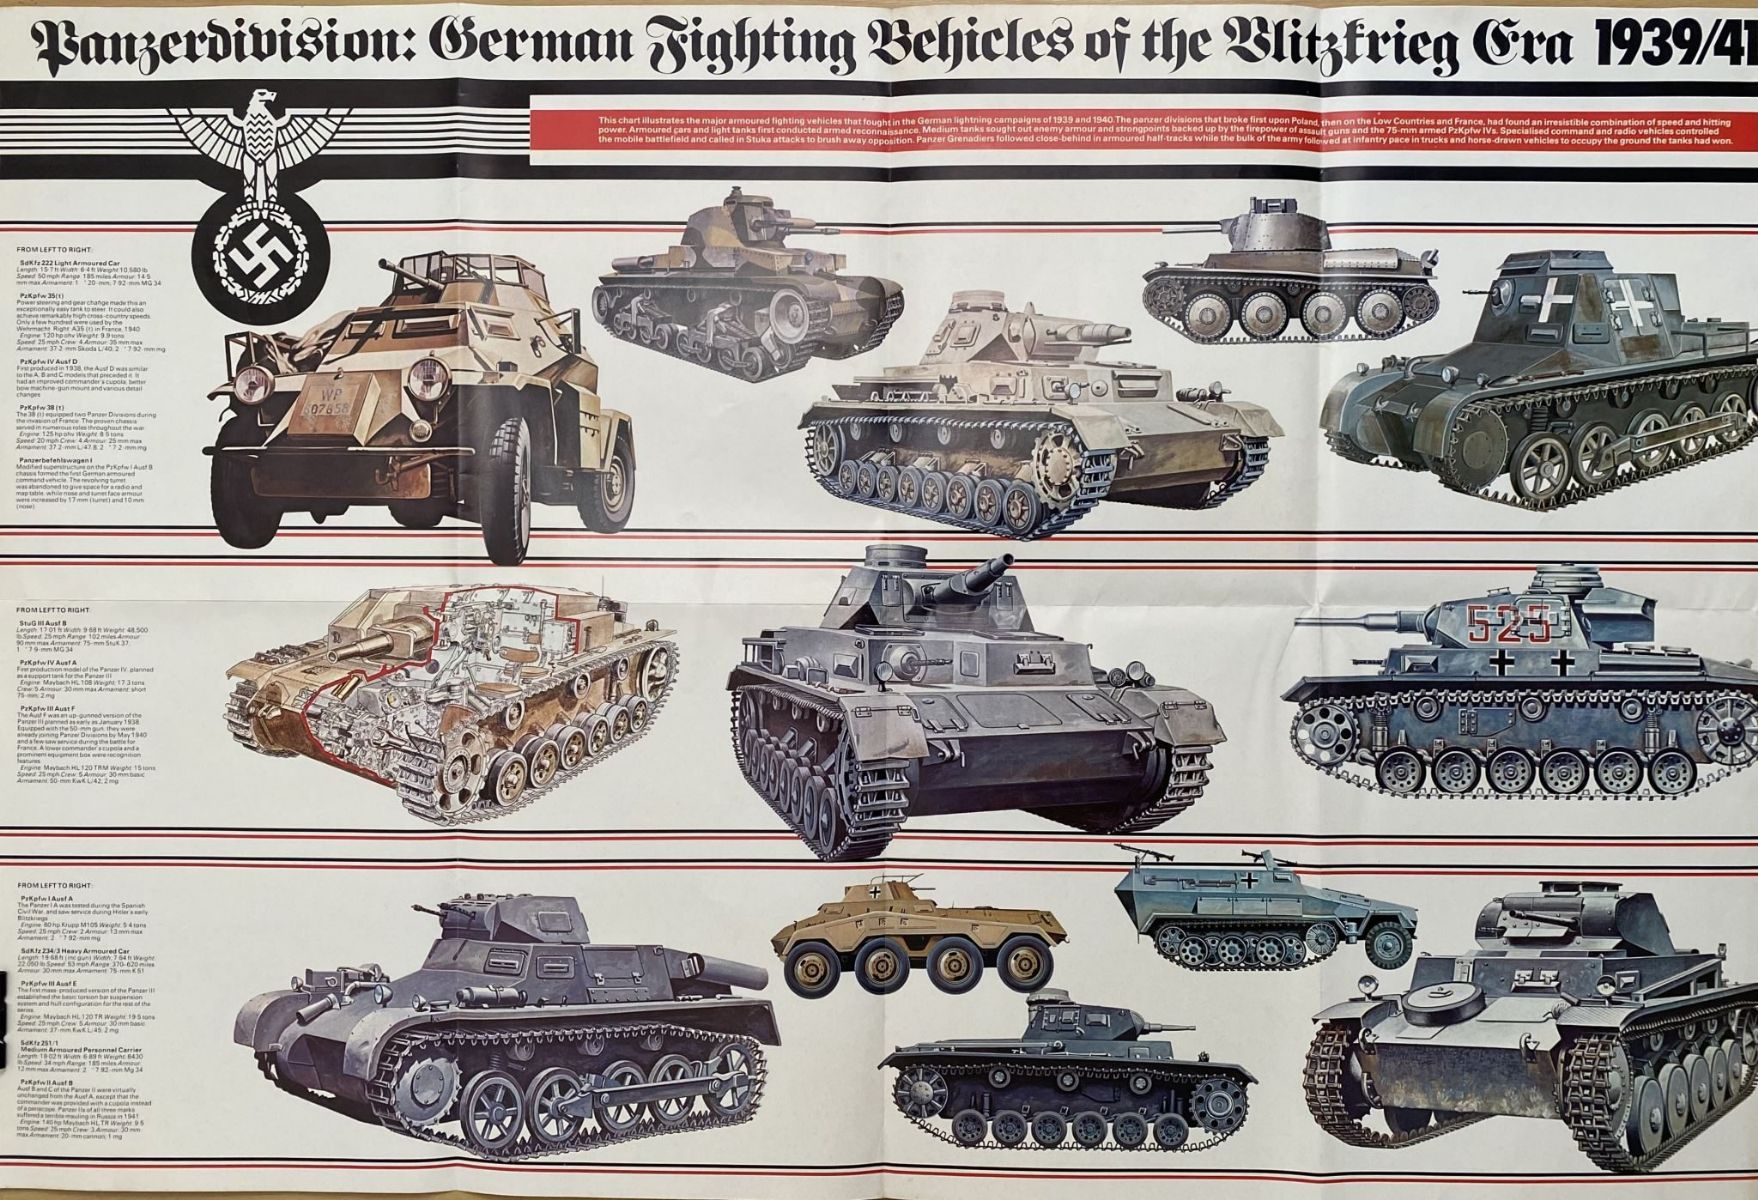 VINTAGE POSTER: German Fighting Vehicles of the Blitzkrieg 1939 / 1941